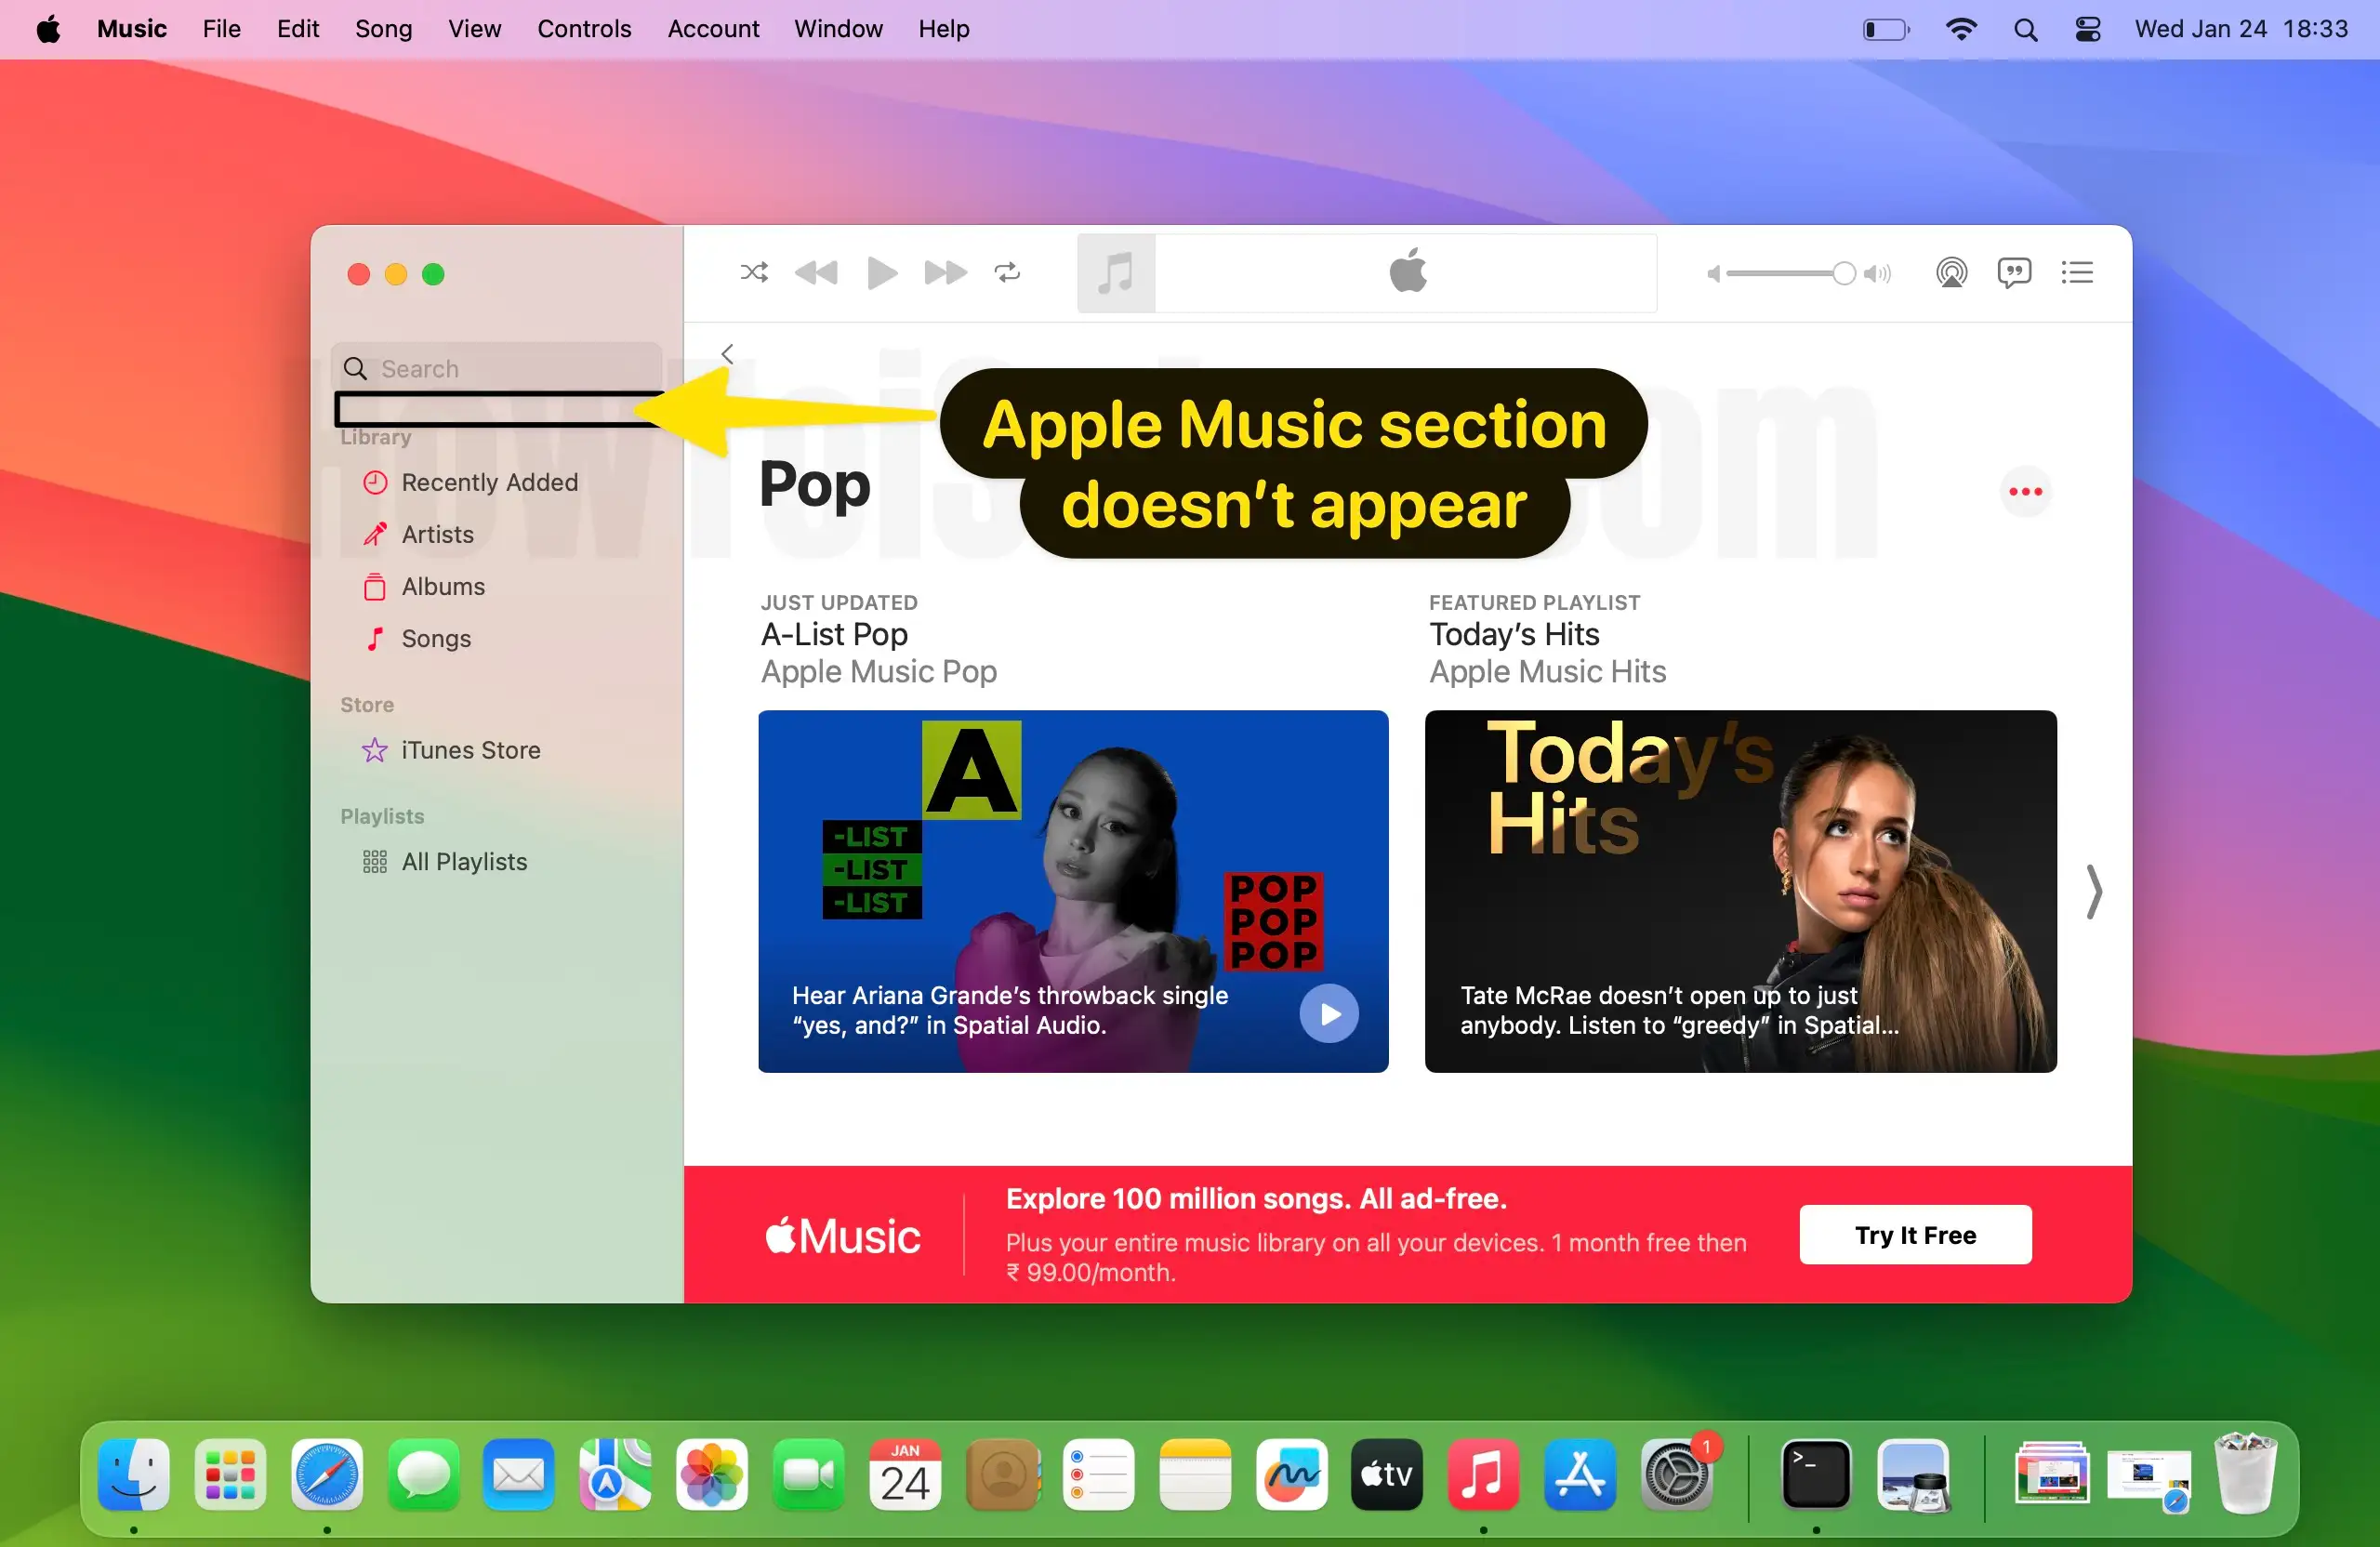 Apple music section doesn’t appear in apple music app on mac